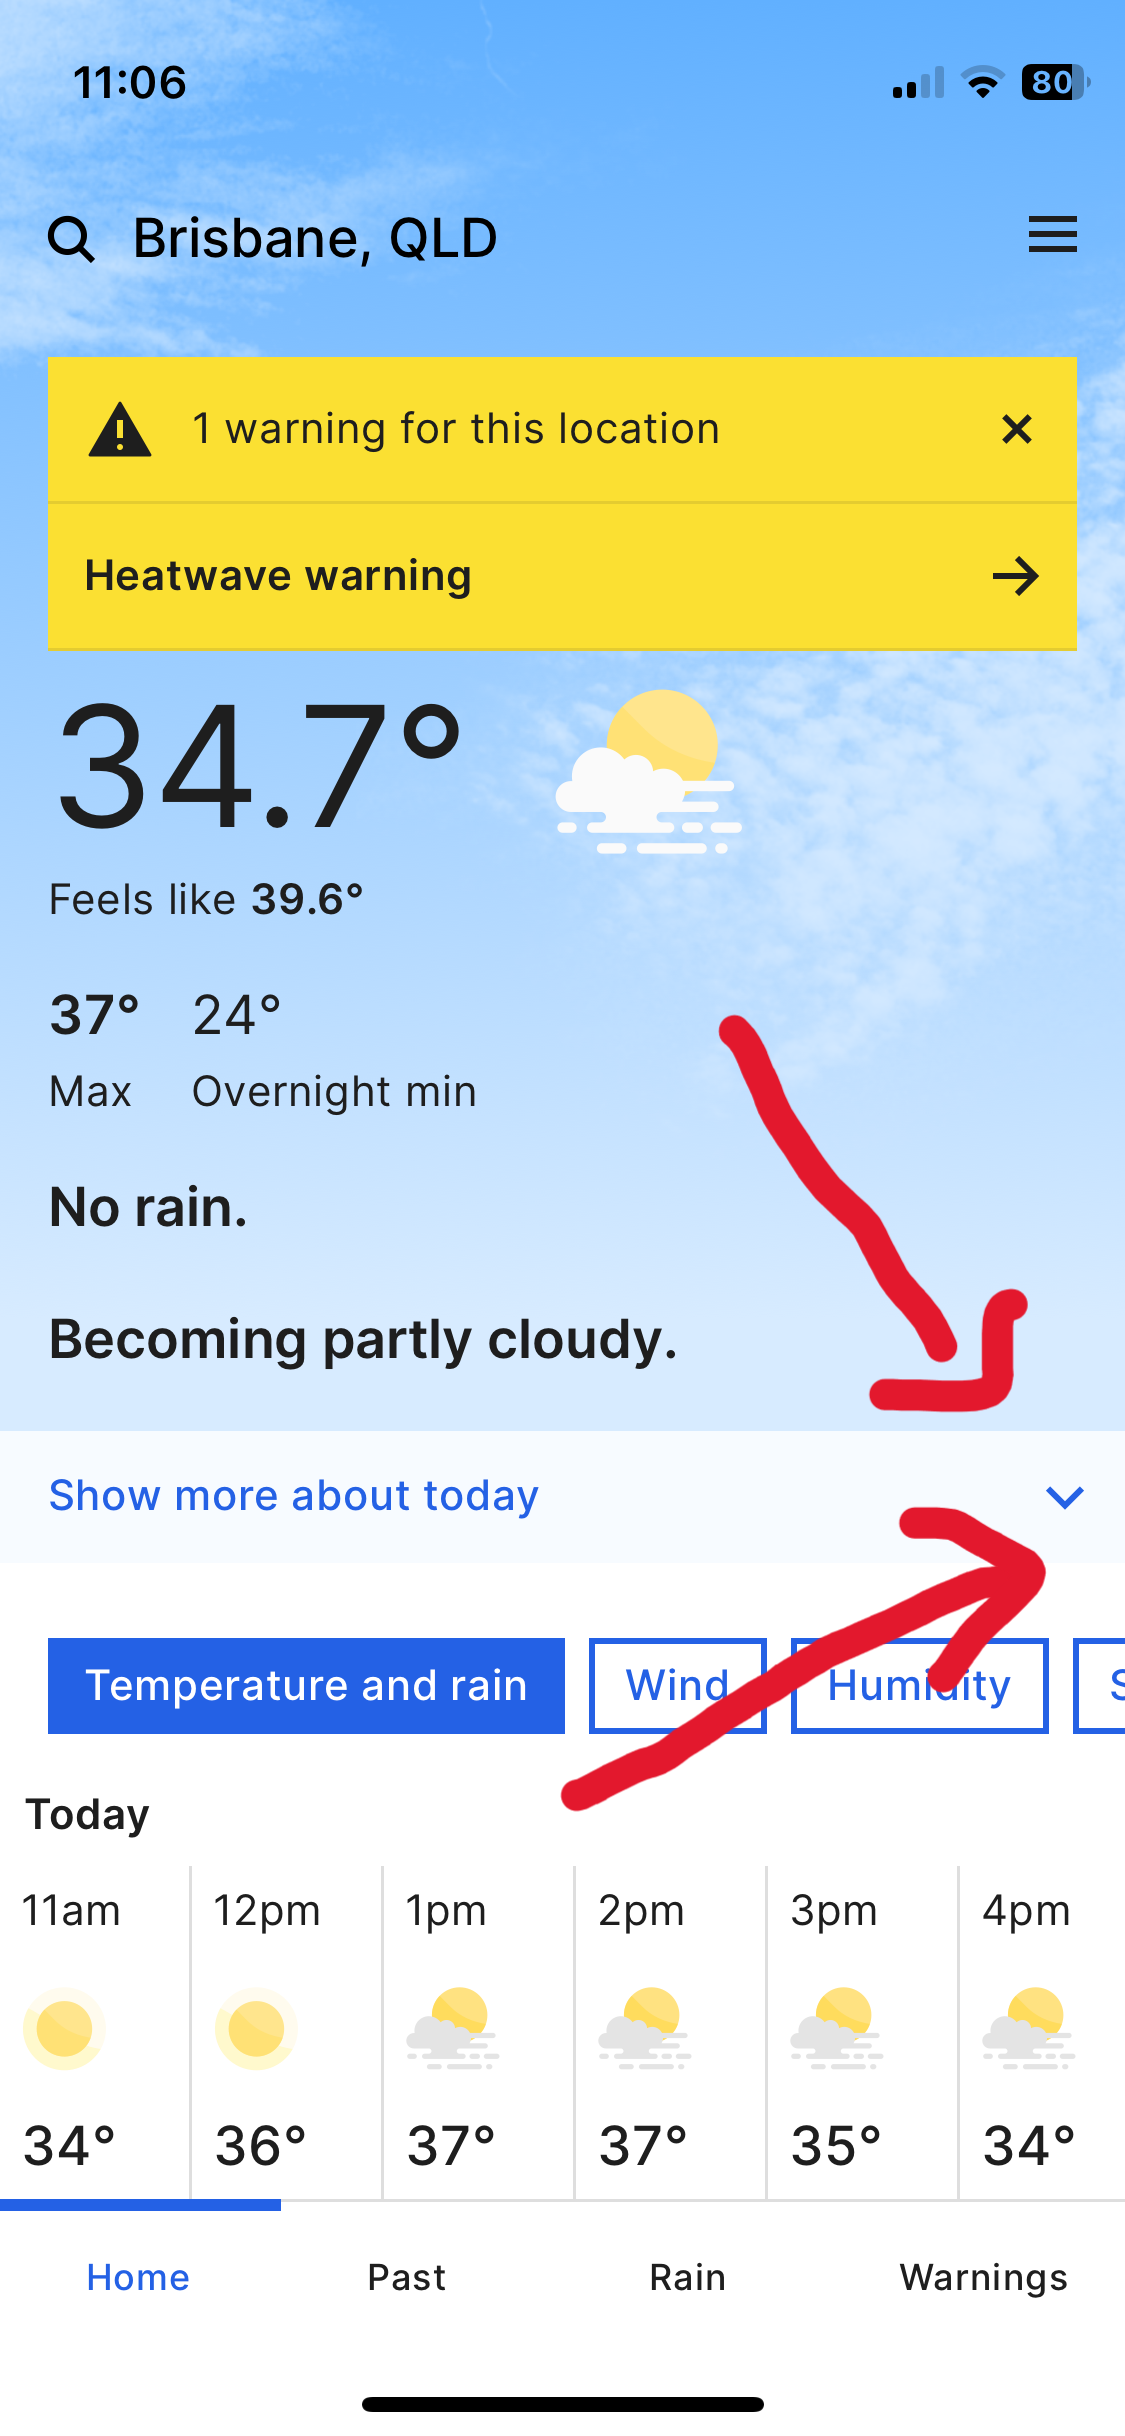 A screenshot of the BOM weather app, with arrows pointing to the "show more about today" arrow. 